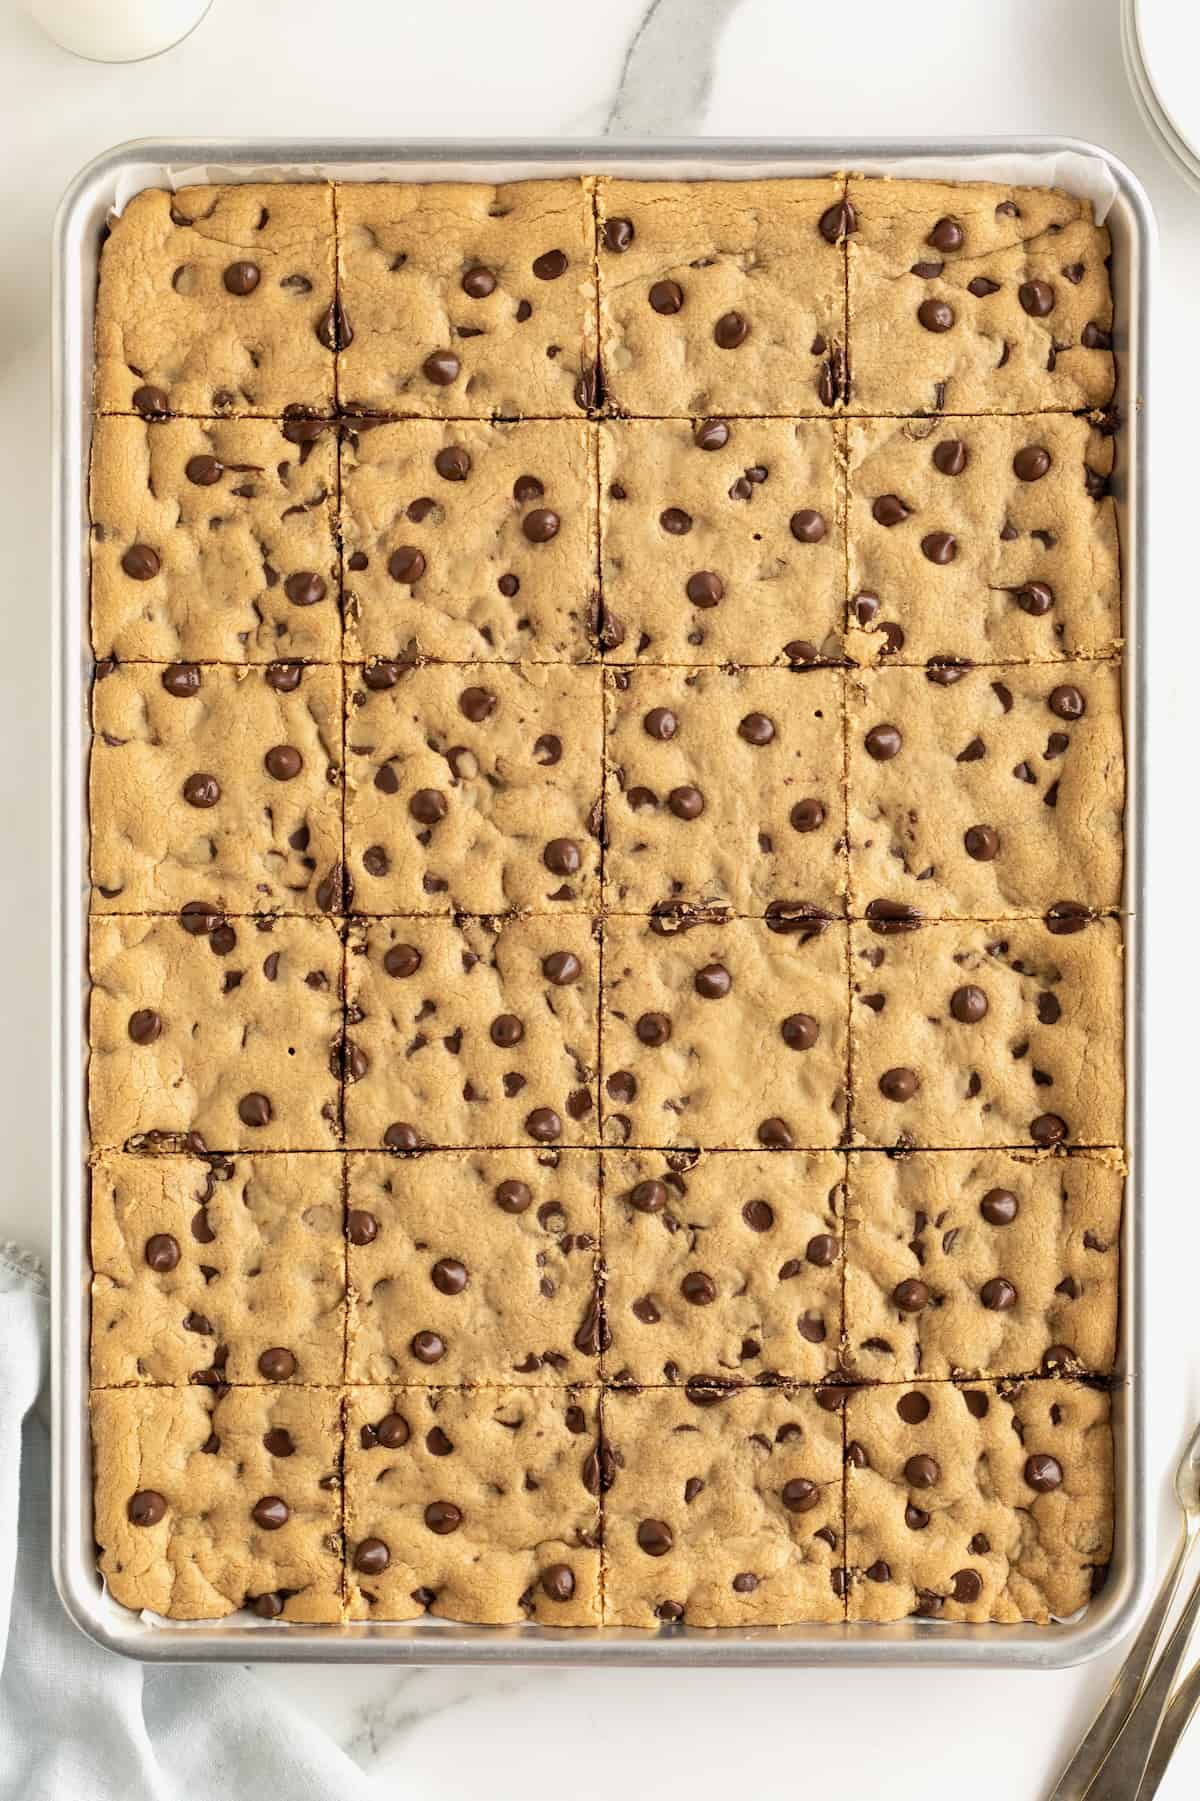 A sheet pan of peanut butter chocolate chip cookies cut into squares.